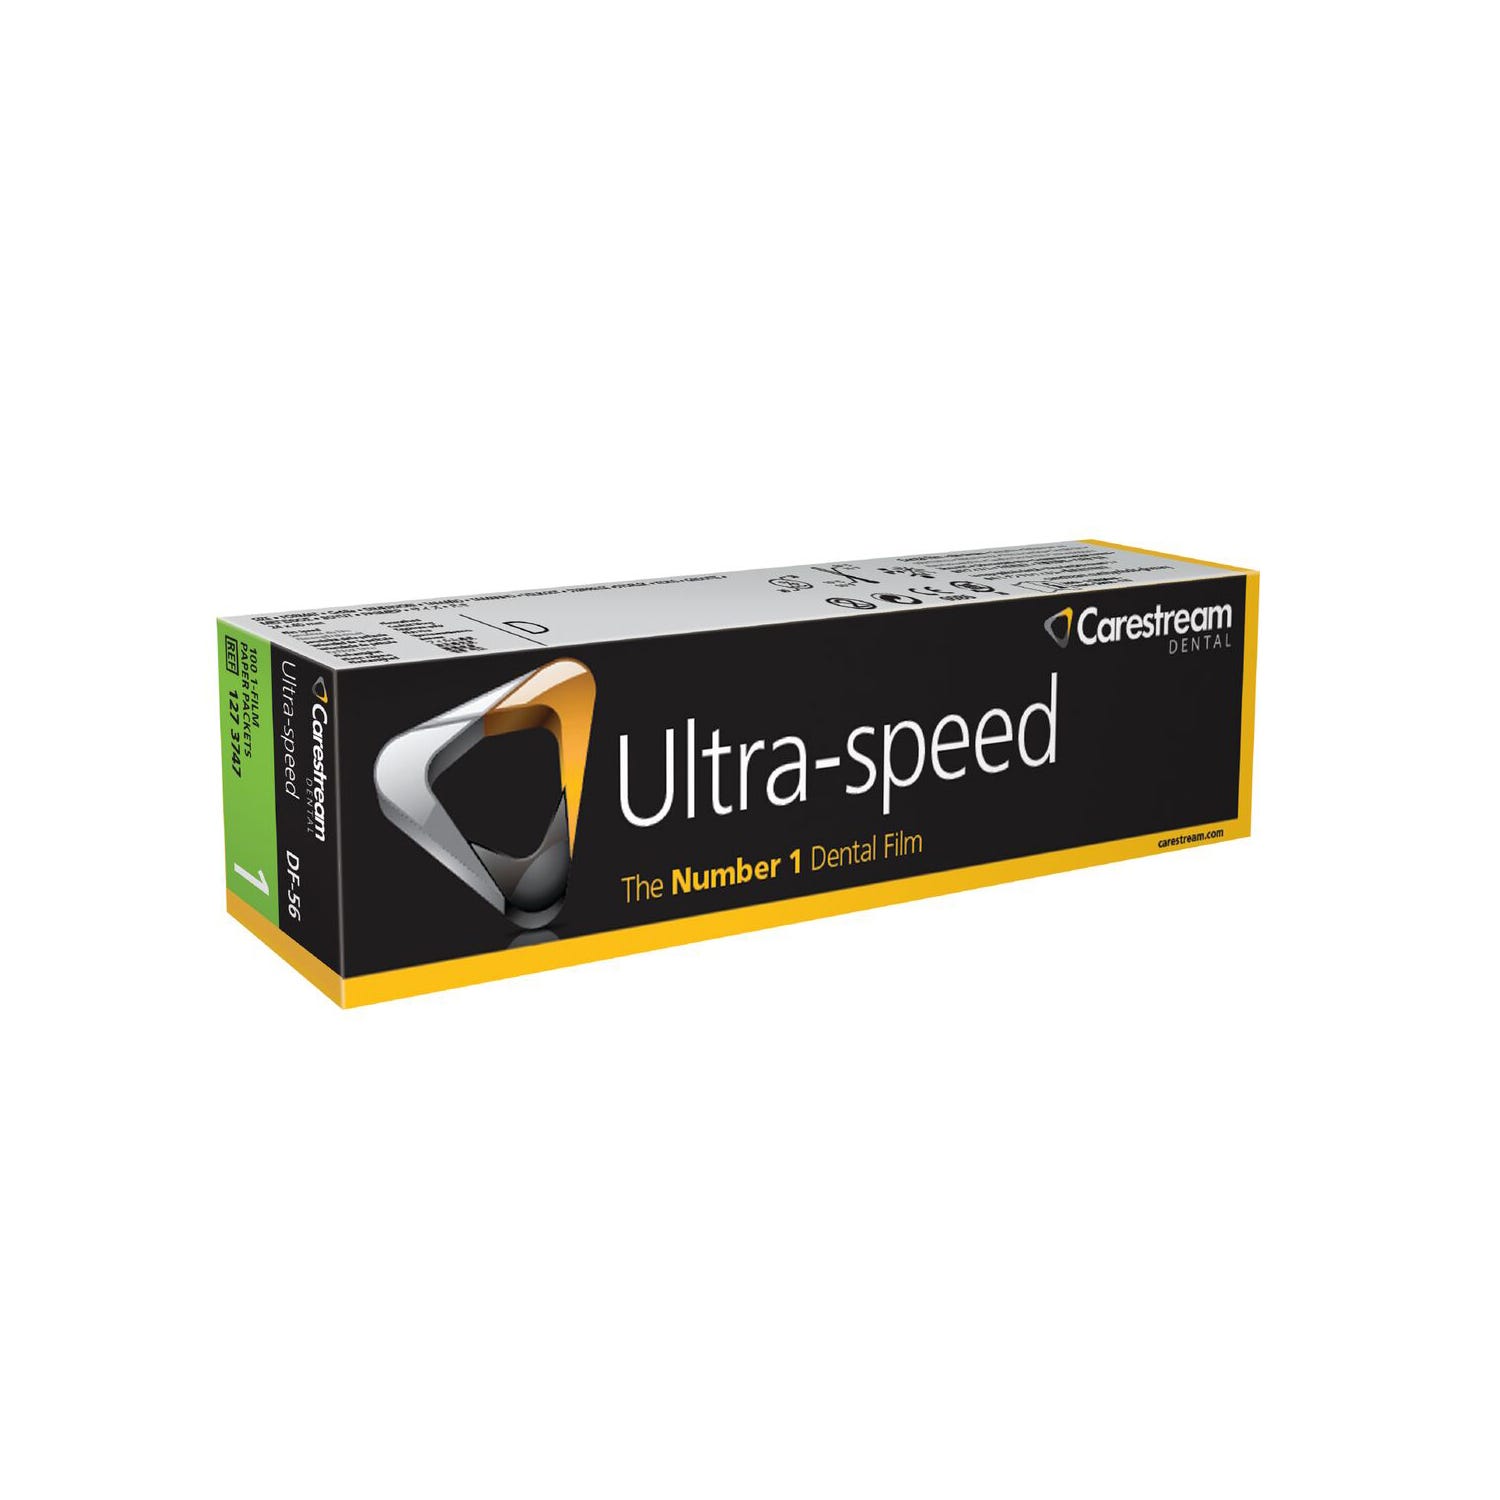 Ultra-speed Dental Film, Size 1, DF-56, Paper Packets - 100/Box